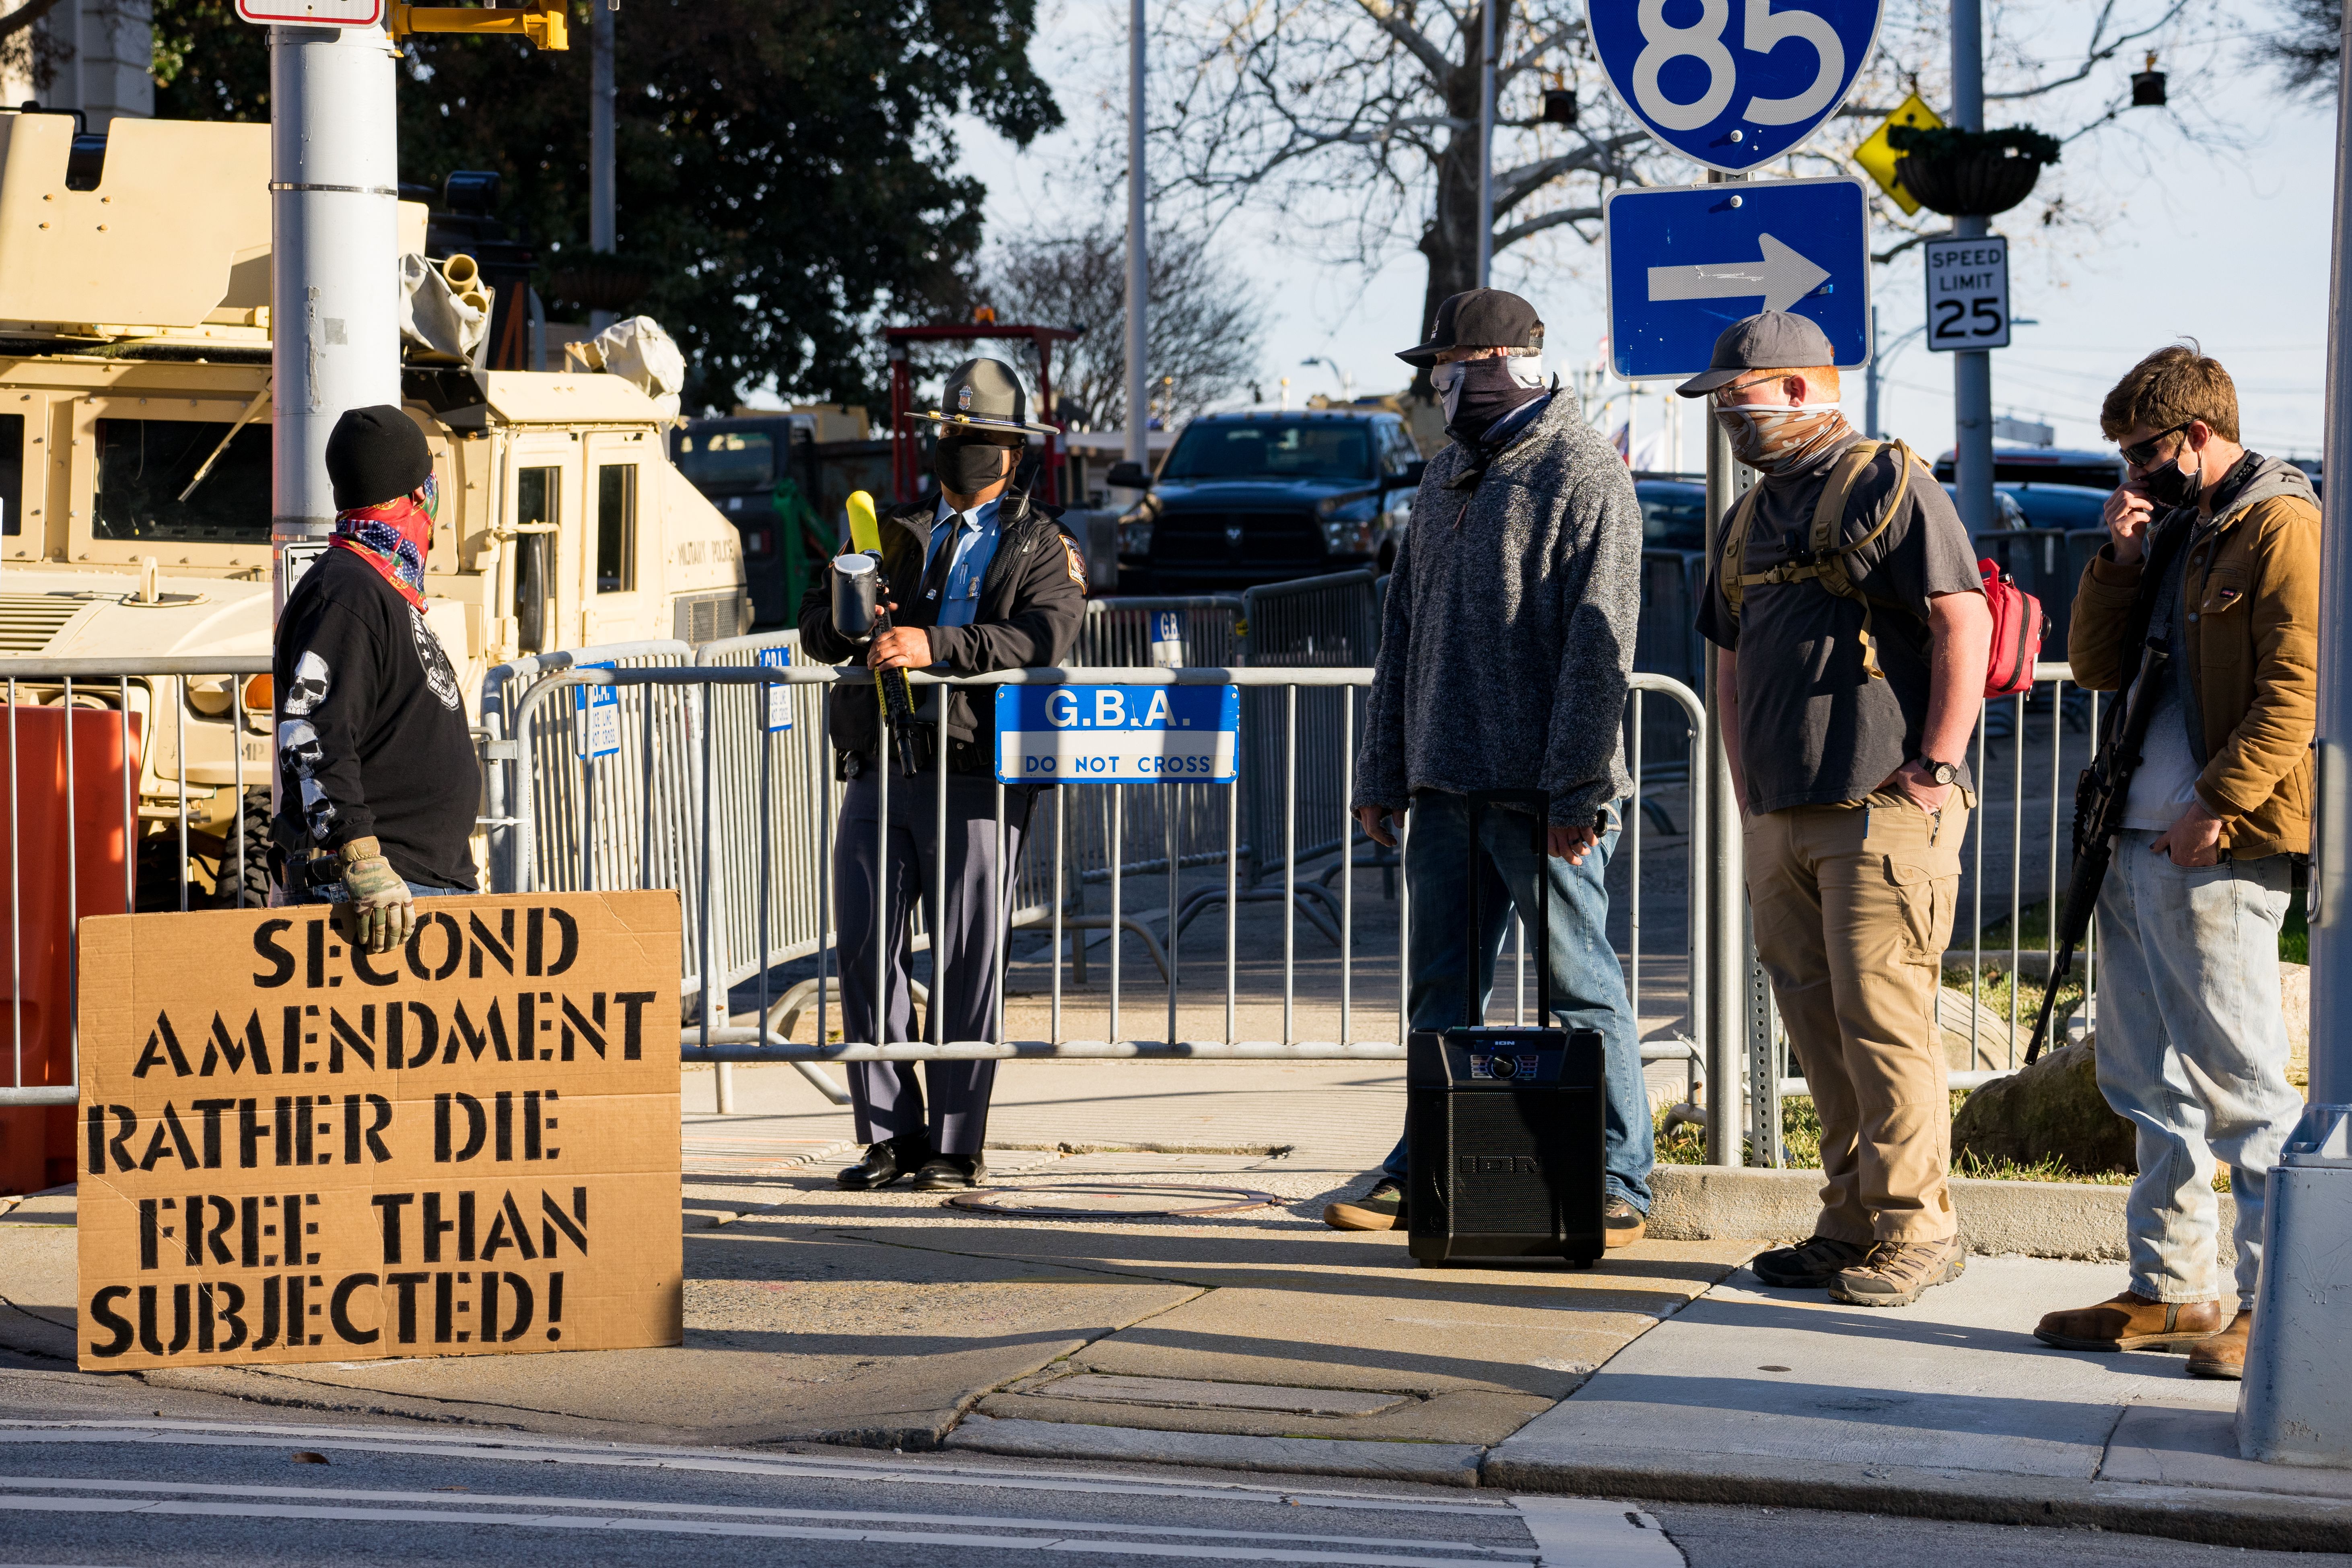 Supporters of the second amendment stand outside of the Georgia Capitol building on January 17